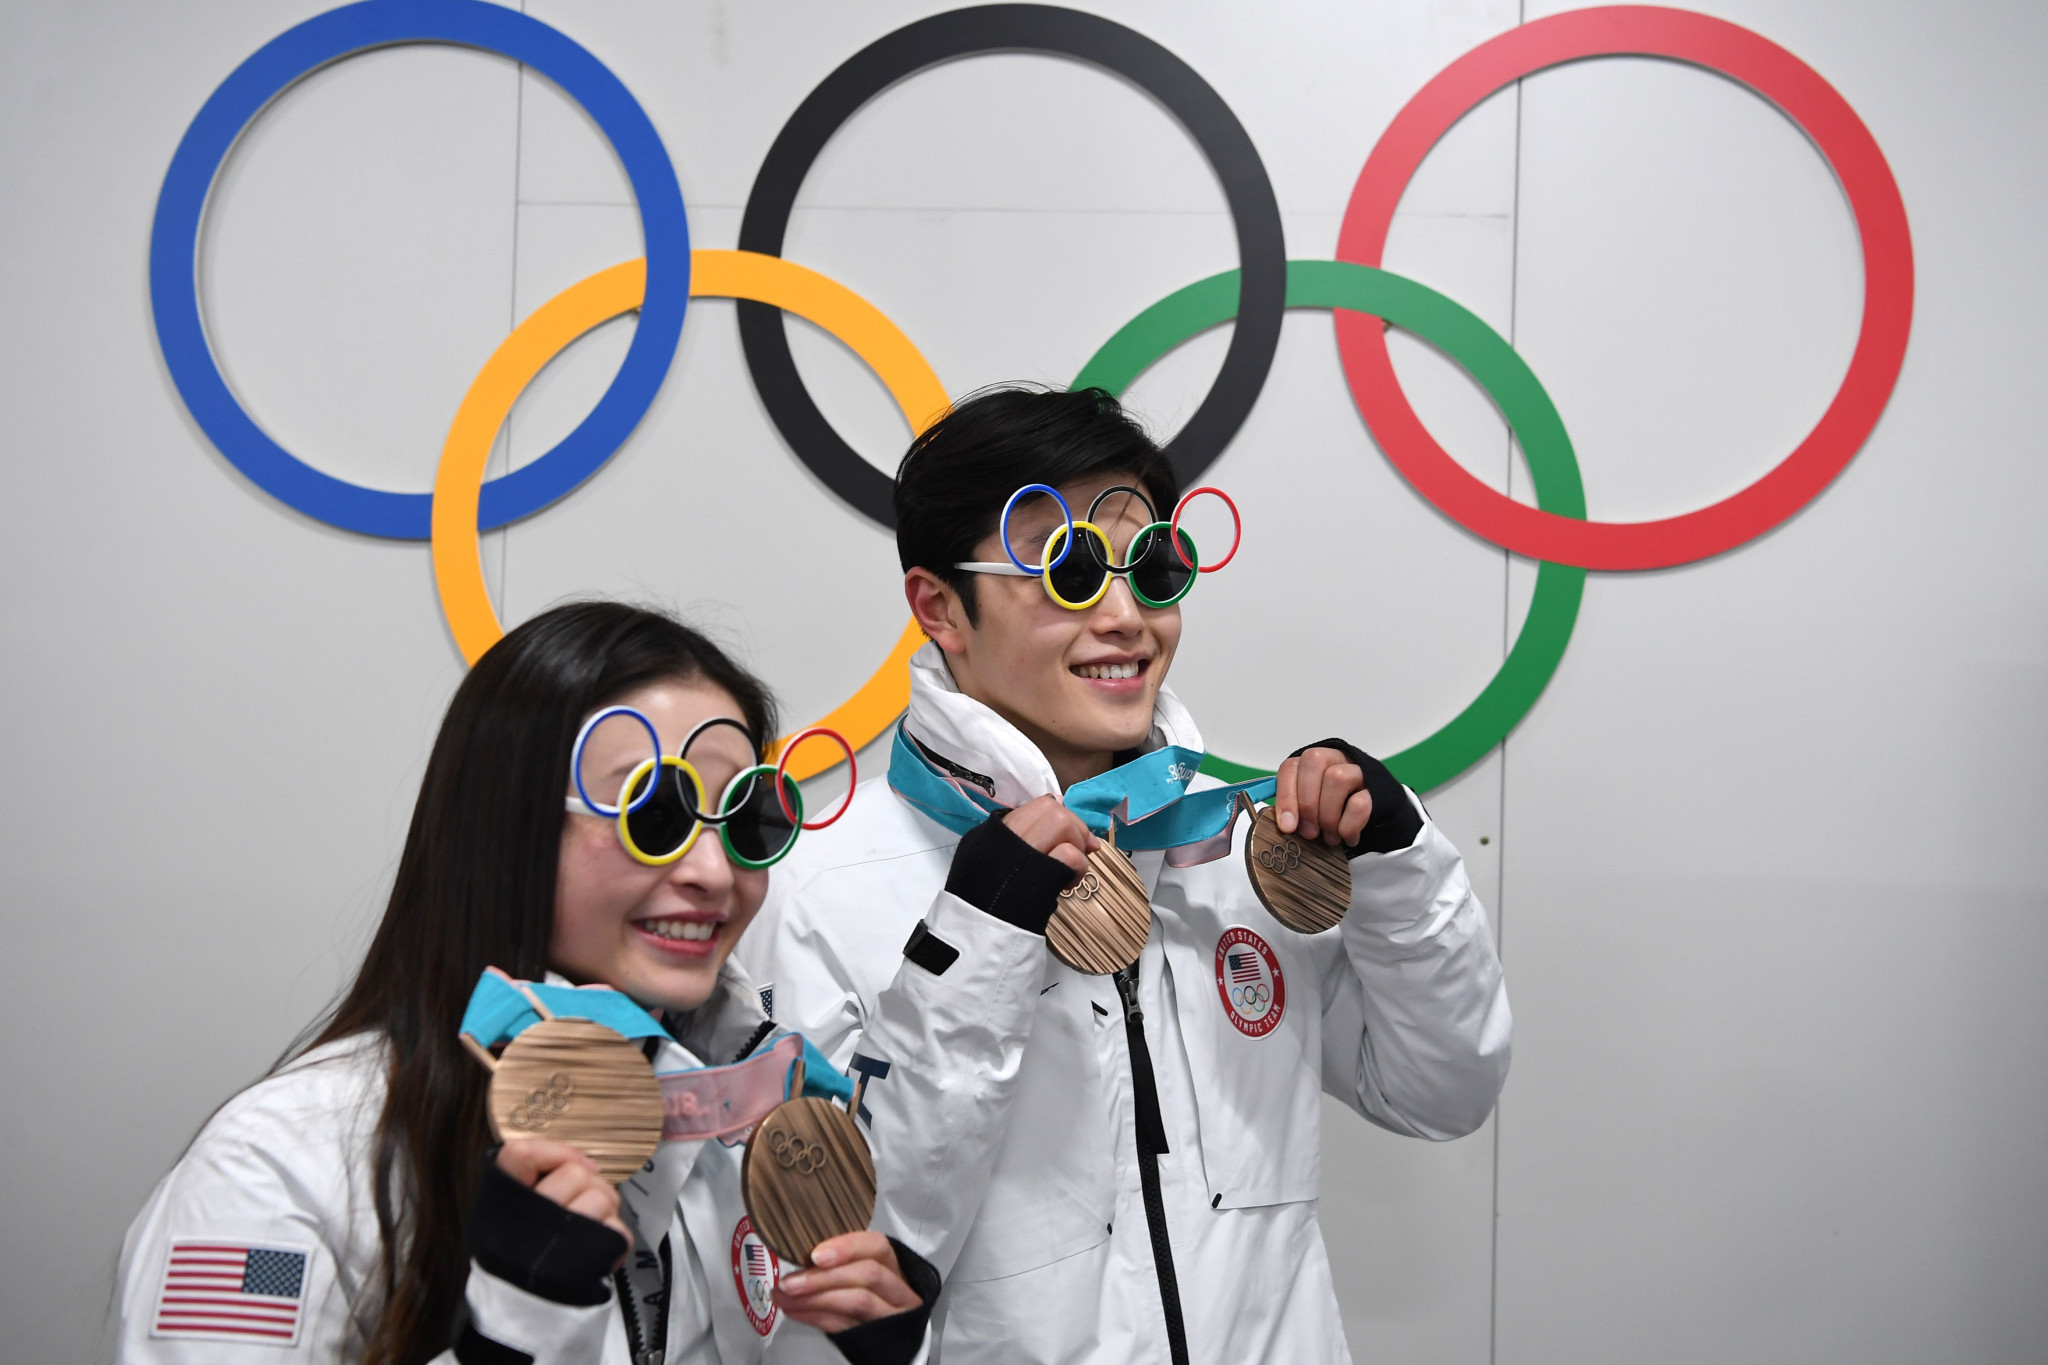 Maia and Alex Shibutani will host the awards dinner in Colorado ©Getty Images